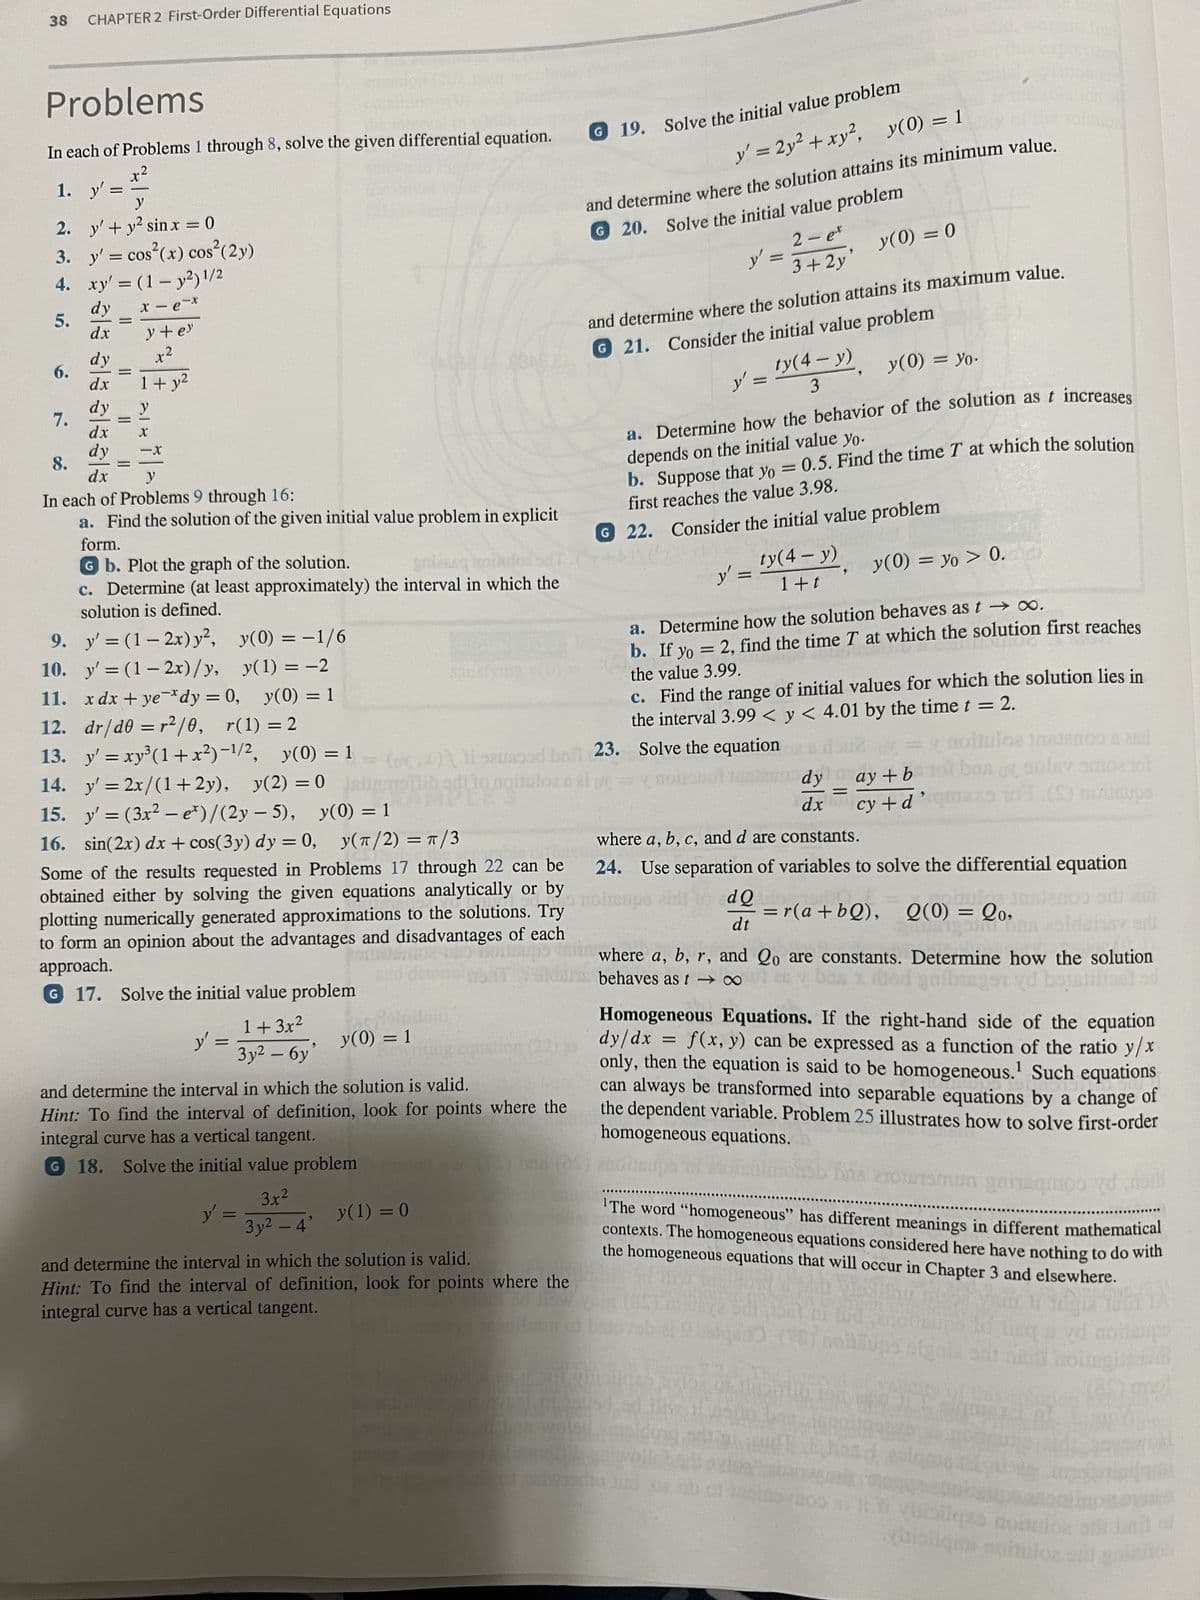 38 CHAPTER 2 First-Order Differential Equations
Problems
In each of Problems 1 through 8, solve the given differential equation.
x²
1. y'=
=
2.
3.
4.
5.
6.
7.
y
y' + y² sinx = 0
y' = cos(x) cos² (2y)
xy' = (1 - y2) 1/2
x-e-x
al ala alaala
dy
dx
dy
dy x²
dx
=
dy
=
||
y + ey
=
1+ y²
8.
In each of Problems 9 through 16:
a. Find the solution of the given initial value problem in explicit
form.
G b. Plot the graph of the solution.
c. Determine (at least approximately) the interval in which the
solution is defined.
9. y' = (1-2x) y²,
y(0) = -1/6
10. y'=(1-2x)/y,
y(1) = -2
11. xdx+ye dy = 0, y(0)
-X
= 1
12. dr/d0 = r²/0, r(1) = 2
13. y'=xy³ (1+x²)-¹/², y(0) = 1
14. y'= 2x/(1+2y), y(2)=0 alibadtto noituloer
15. y' = (3x² - e*)/(2y-5), y(0) = 1
16. sin(2x) dx + cos(3y) dy = 0, y(π/2) = π/3
o the
Th
Some of the results requested in Problems 17 through 22 can be
obtained either by solving the given equations analytically or by
plotting numerically generated approximations to the solutions. Try
to form an opinion about the advantages and disadvantages of each
approach.
G 17. Solve the initial value problem
dx y
y' =
1+3x²
Зу2 — бу
y' =
"
3x²
3y² - 4'
and determine the interval in which the solution is valid.
Hint: To find the interval of definition, look for points where the
integral curve has a vertical tangent.
G 18. Solve the initial value problem
y(0) = 1
y(1) = 0
G 19. Solve the initial value problem
and determine the interval in which the solution is valid.
Hint: To find the interval of definition, look for points where the
integral curve has a vertical tangent.
y' = 2y² + xy², y(0) = 1
and determine where the solution attains its minimum value.
G 20. Solve the initial value problem
2-et
3 + 2y
y' =
and determine where the solution attains its maximum value.
G21. Consider the initial value problem
y' =
y(0) = yo.
G 22.
y'
ty(4- y)
3
a. Determine how the behavior of the solution as t increases
depends on the initial value yo.
b. Suppose that yo = 0.5. Find the time T at which the solution
first reaches the value 3.98.
=
Consider the initial value problem
(.*)\ 11 sausood bail 23. Solve the equation
ty(4- y)
1+t
y(0) = 0
9
a. Determine how the solution behaves as t → ∞.
b. If yo = 2, find the time T at which the solution first reaches
the value 3.99.
dy
dx
c. Find the range of initial values for which the solution lies in
the interval 3.99 < y < 4.01 by the time t = 2.
=
y(0) = yo > 0.
aoiuloa toetanoo & 2nd
ay+b 1 bas of sulny amos tot
cy + d
TOT (S) nailsups
9
where a, b, c, and d are constants.
24. Use separation of variables to solve the differential equation
dQ
dt
=r(a+bQ), Q(0) = 20,
igoin 608
where a, b, r, and Qo are constants. Determine how the solution
behaves as t→∞
garbingen yd bajariliant od
Homogeneous Equations. If the right-hand side of the equation
dy/dx = f(x, y) can be expressed as a function of the ratio y/x
only, then the equation is said to be homogeneous.¹ Such equations
LORE
can always be transformed into separable equations by a change of
the dependent variable. Problem 25 illustrates how to solve first-order
homogeneous equations.
The word “homogeneous" has different meanings in different mathematical
contexts. The homogeneous equations considered here have nothing to do with
the homogeneous equations that will occur in Chapter 3 and elsewhere.
Vosling me
neillups sign
000
nitit
yd moitampo
ili lisilqzs
bibliqmi apbuloz